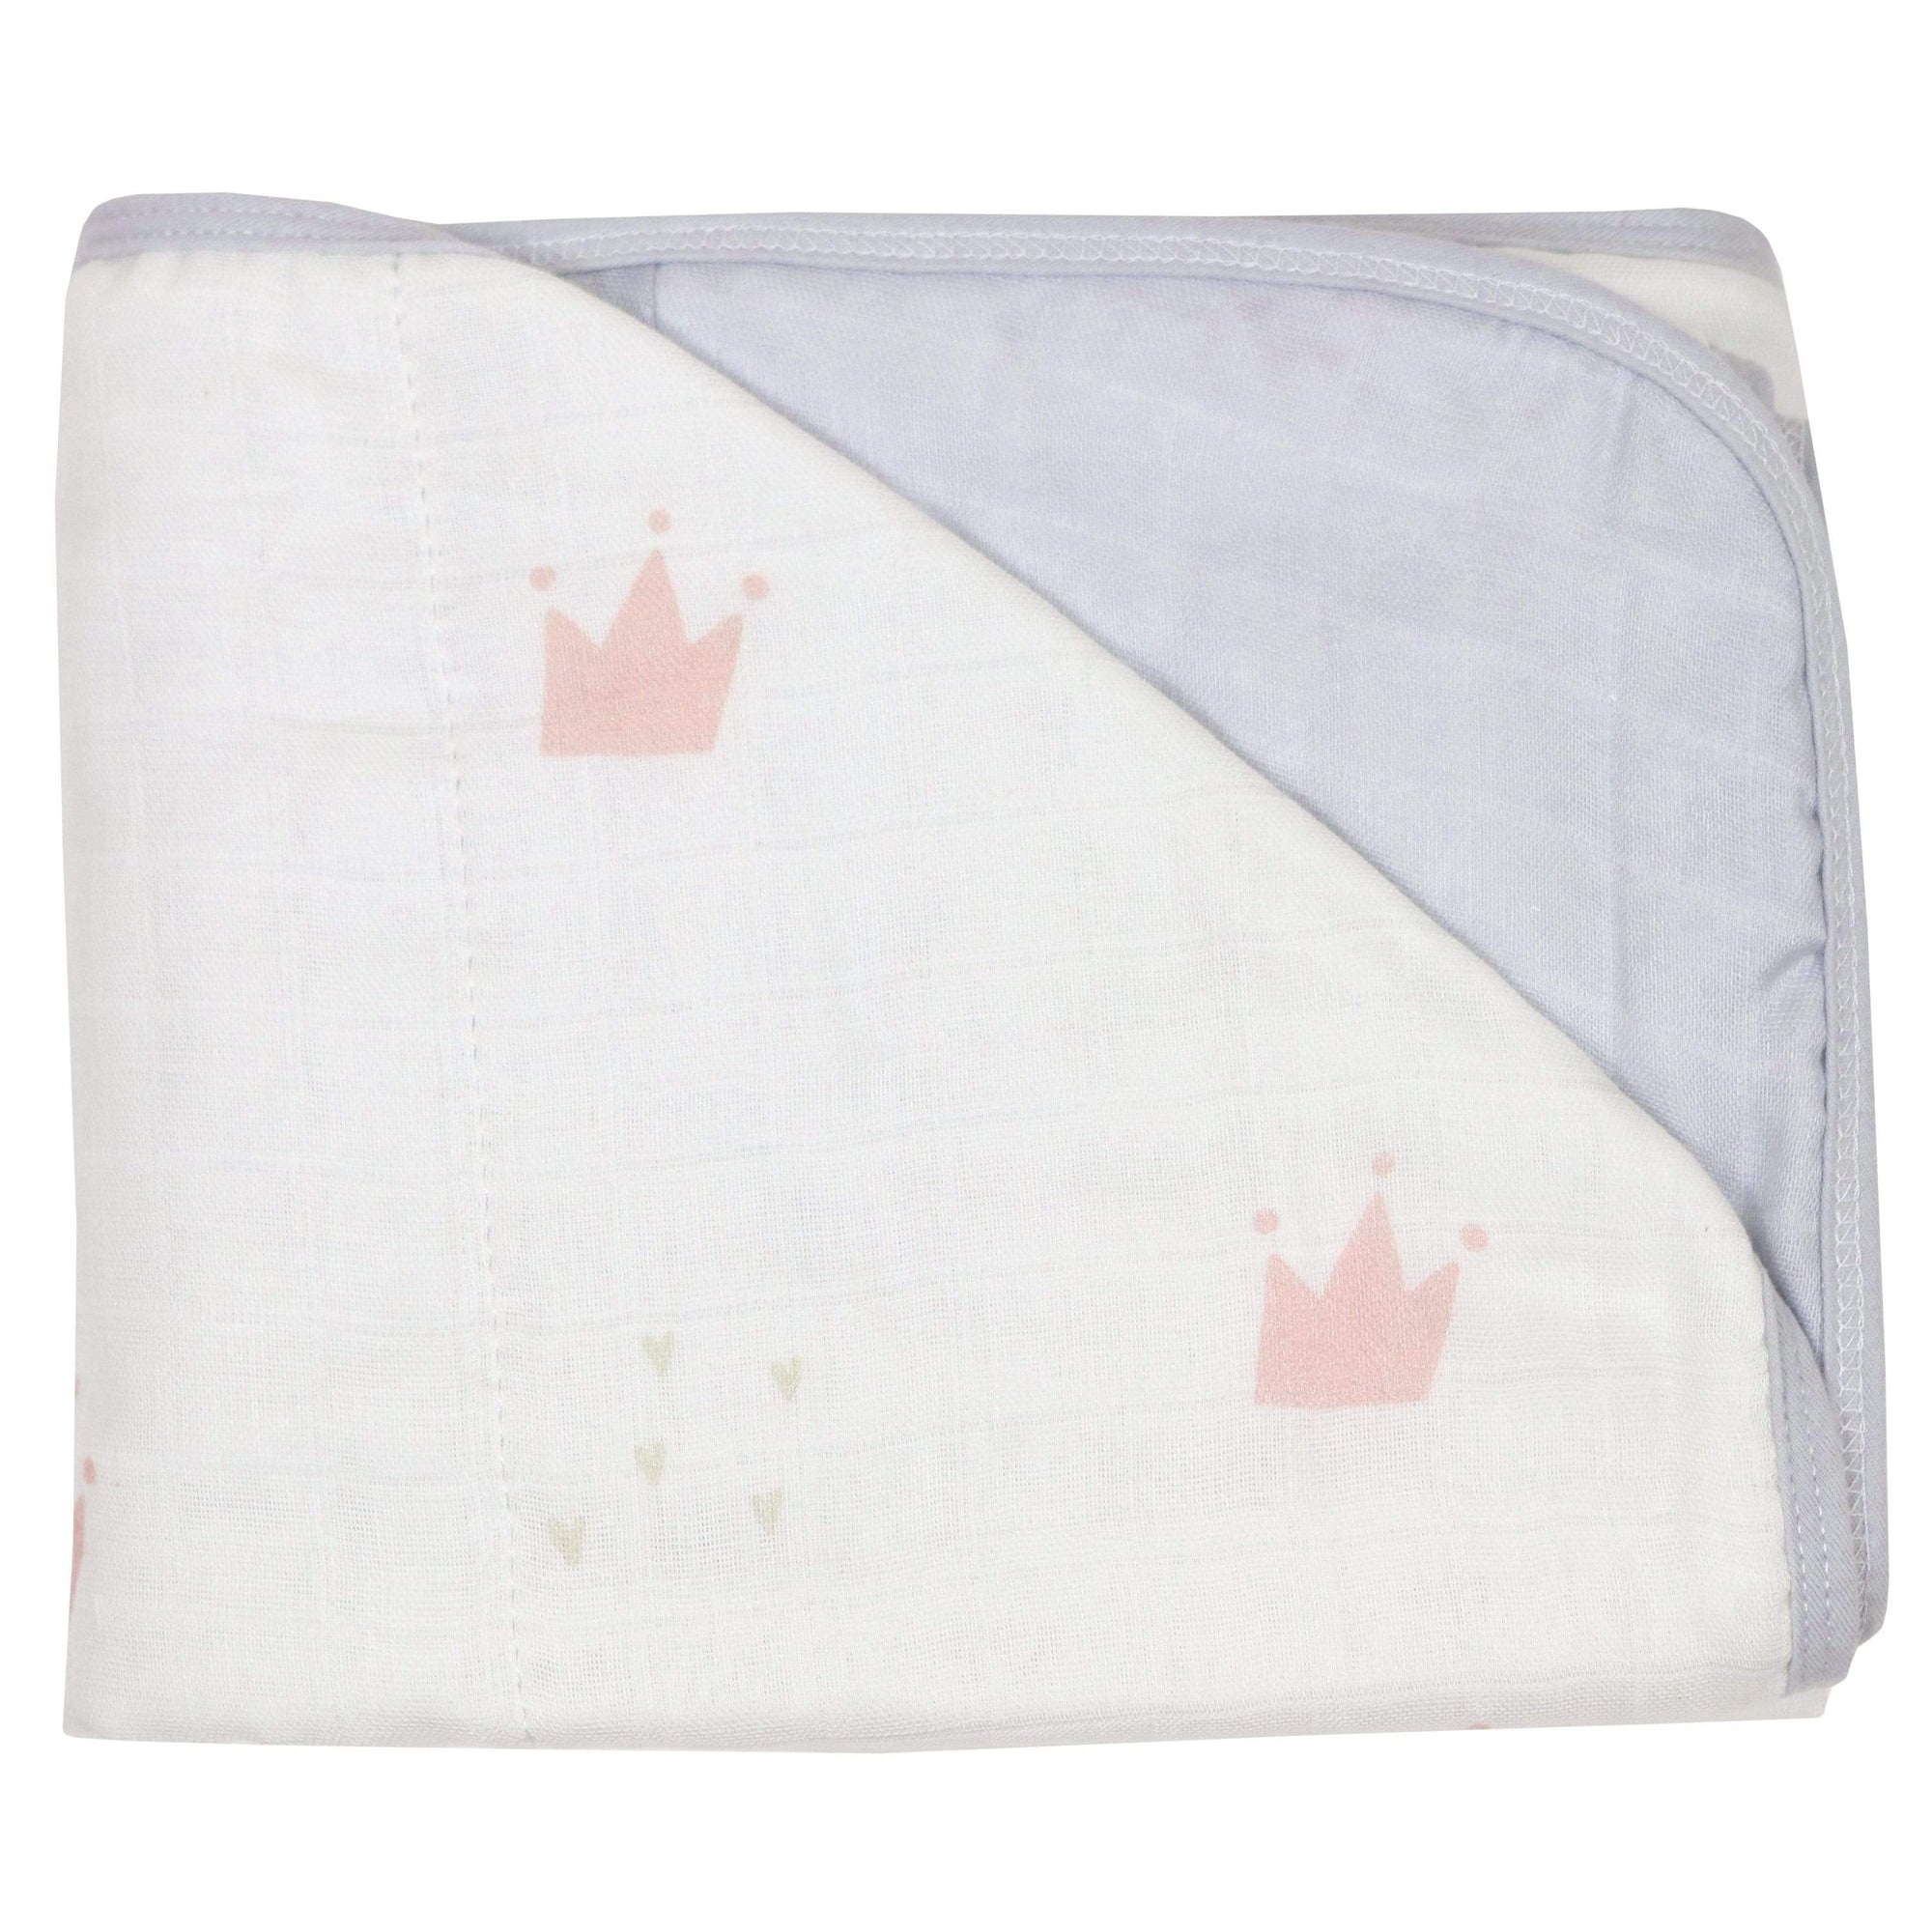 GooseWaddle Blanket Bamboo Muslin Quilted Blanket (Pink Crowns & Gray)